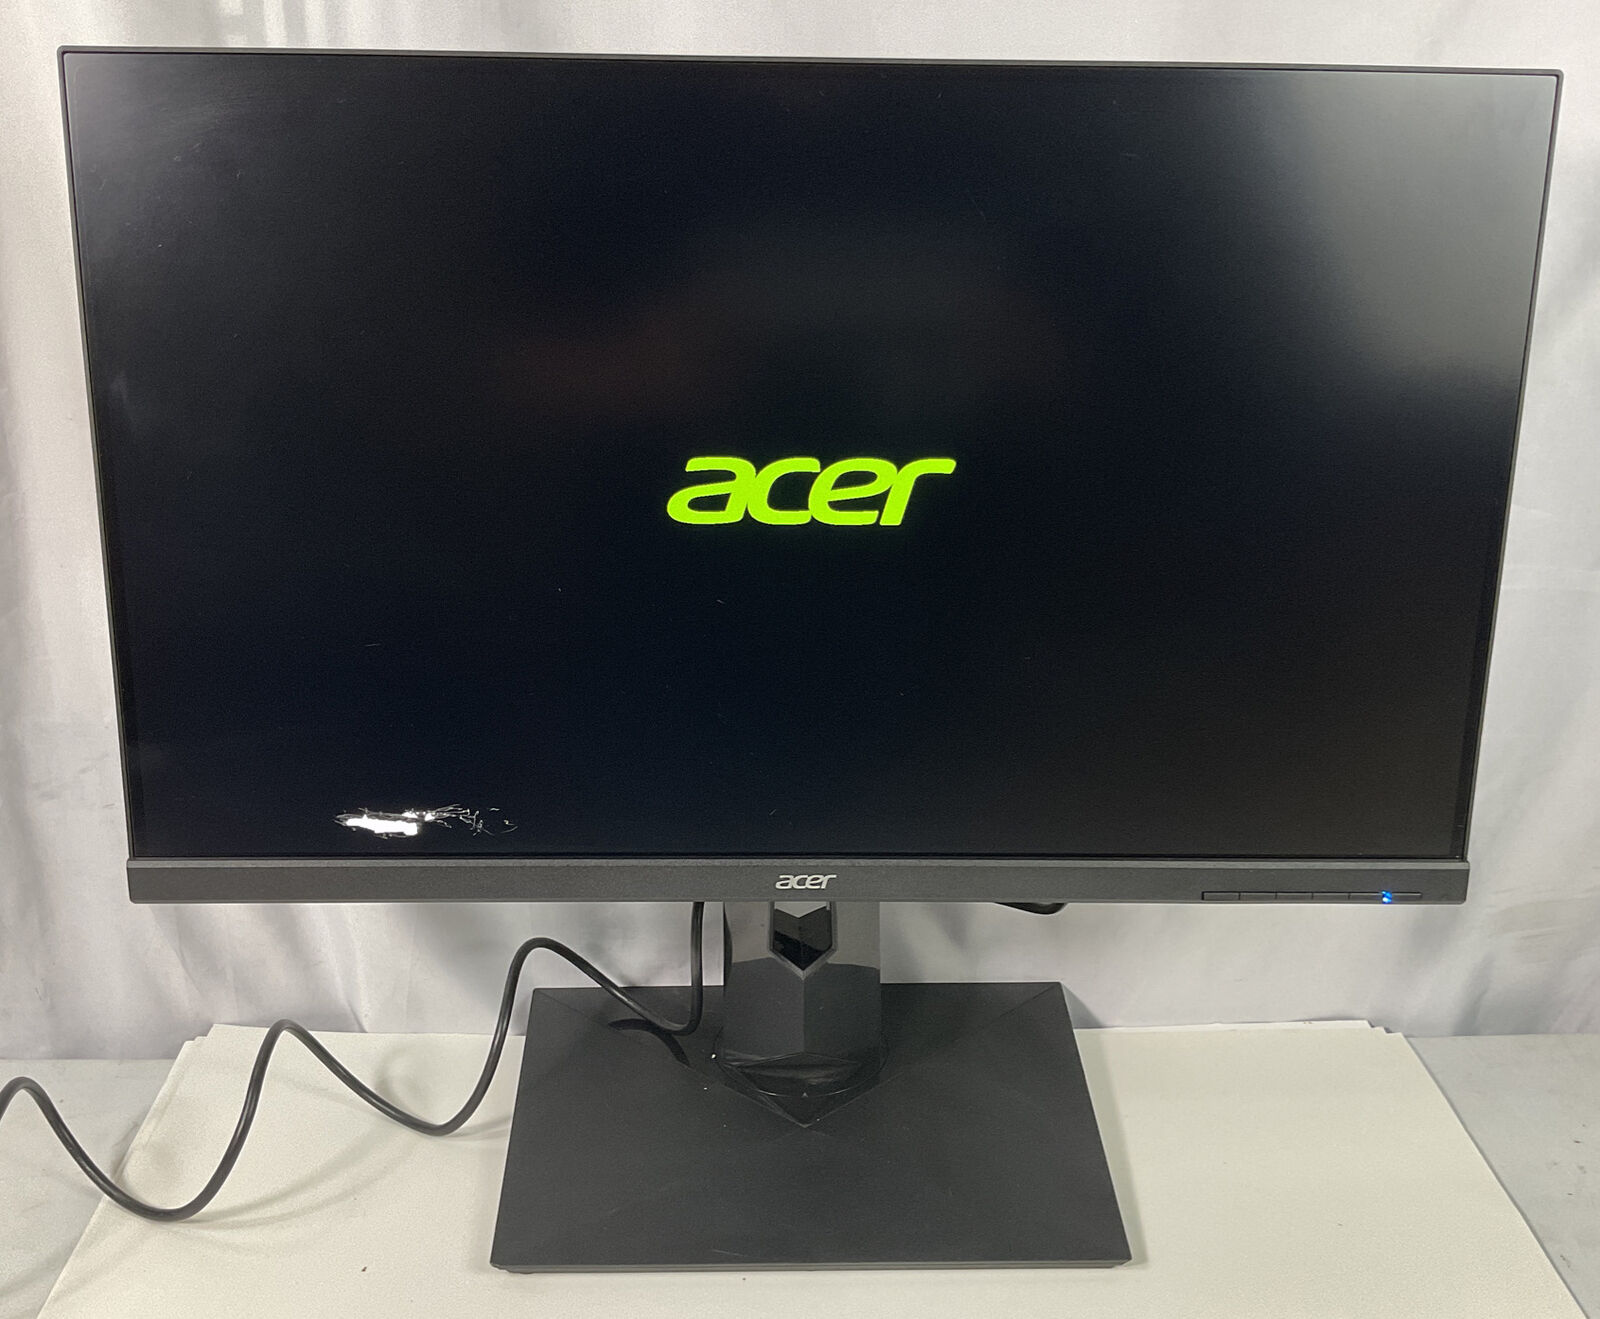 Acer Model CB271HU 27” IPS  Monitor With Stand With Power Cord- SELLING AS IS